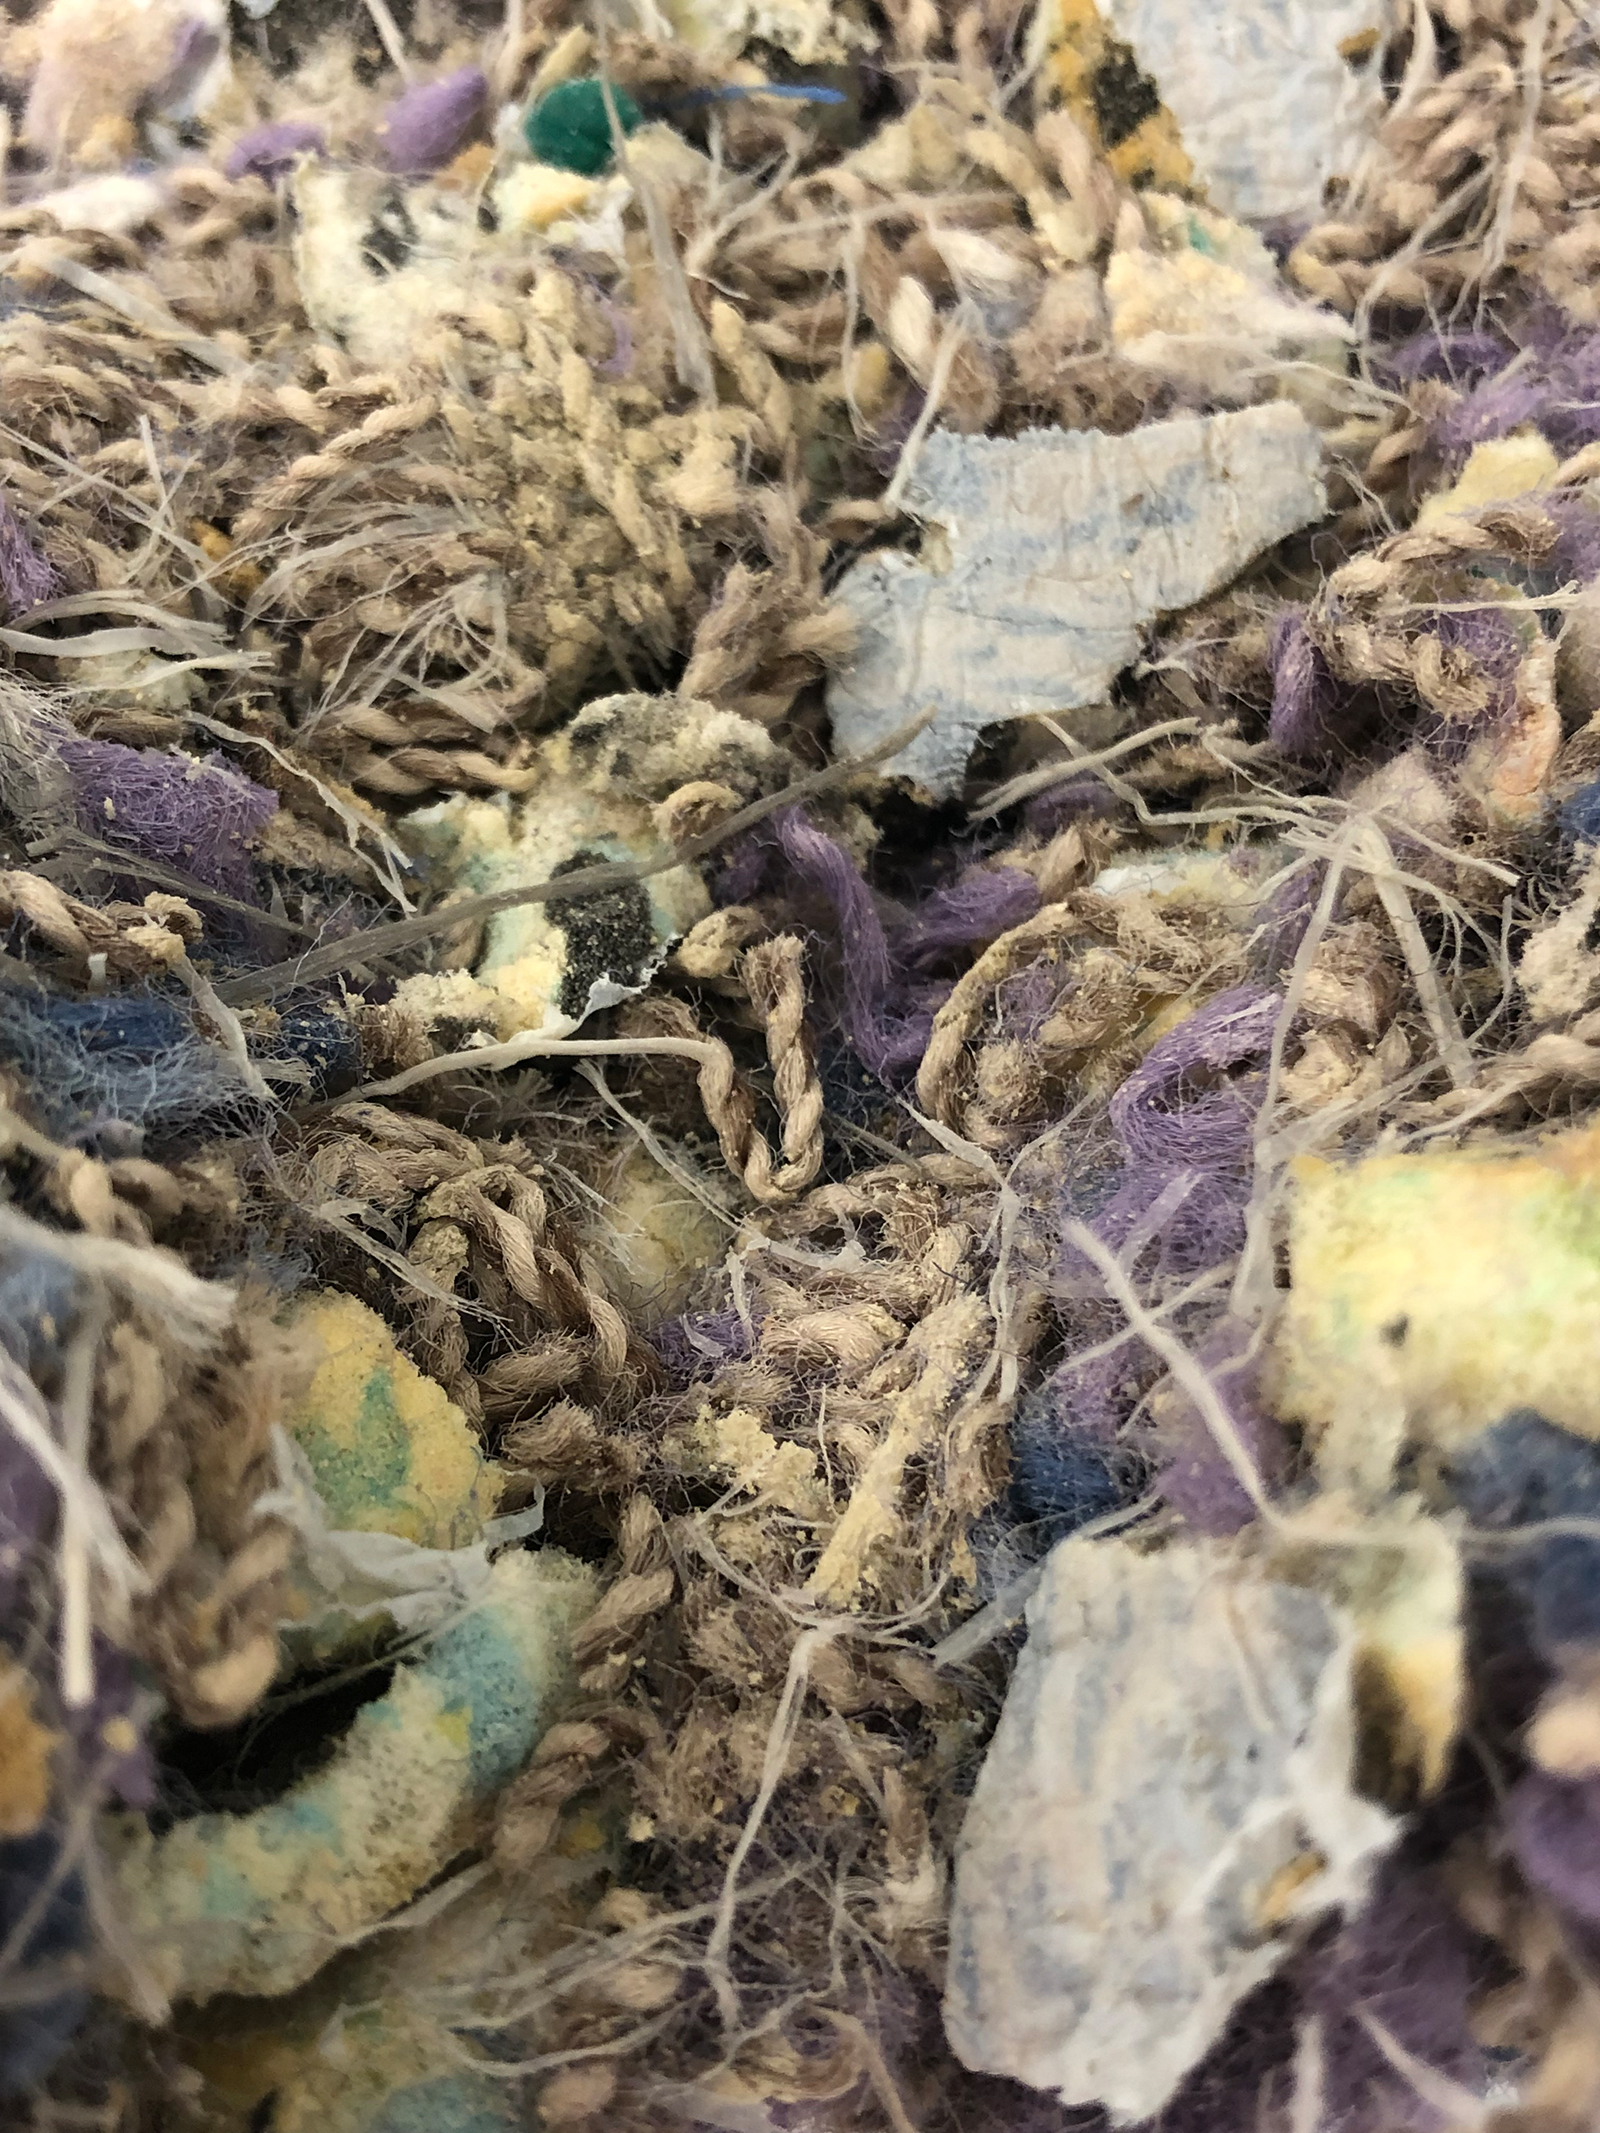 Broken-down carpet waste that is subsequently cleaned and has ionic liquid added to it.